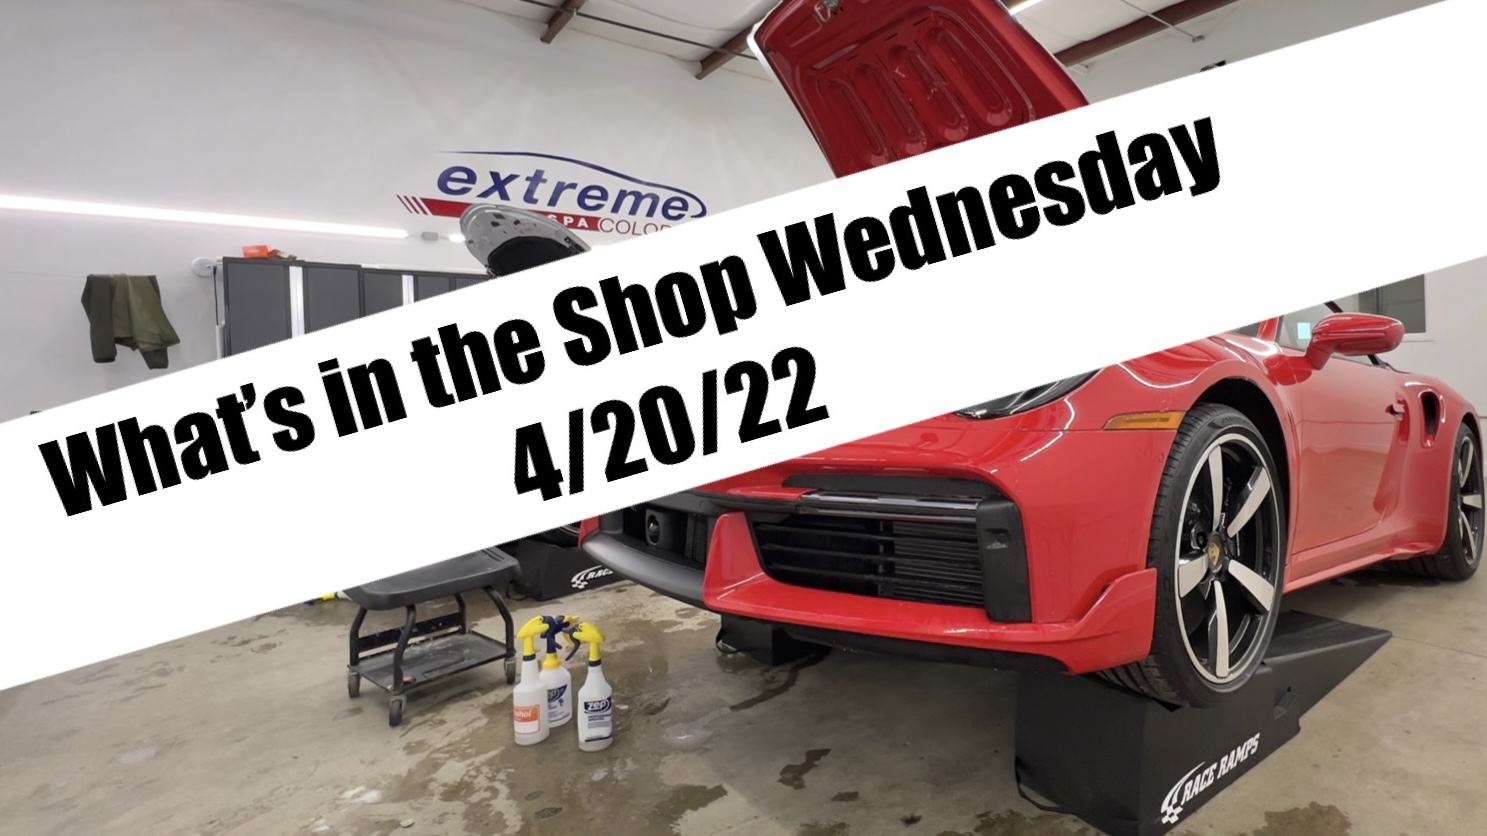 What’s in the Shop Wednesday 4/20/22